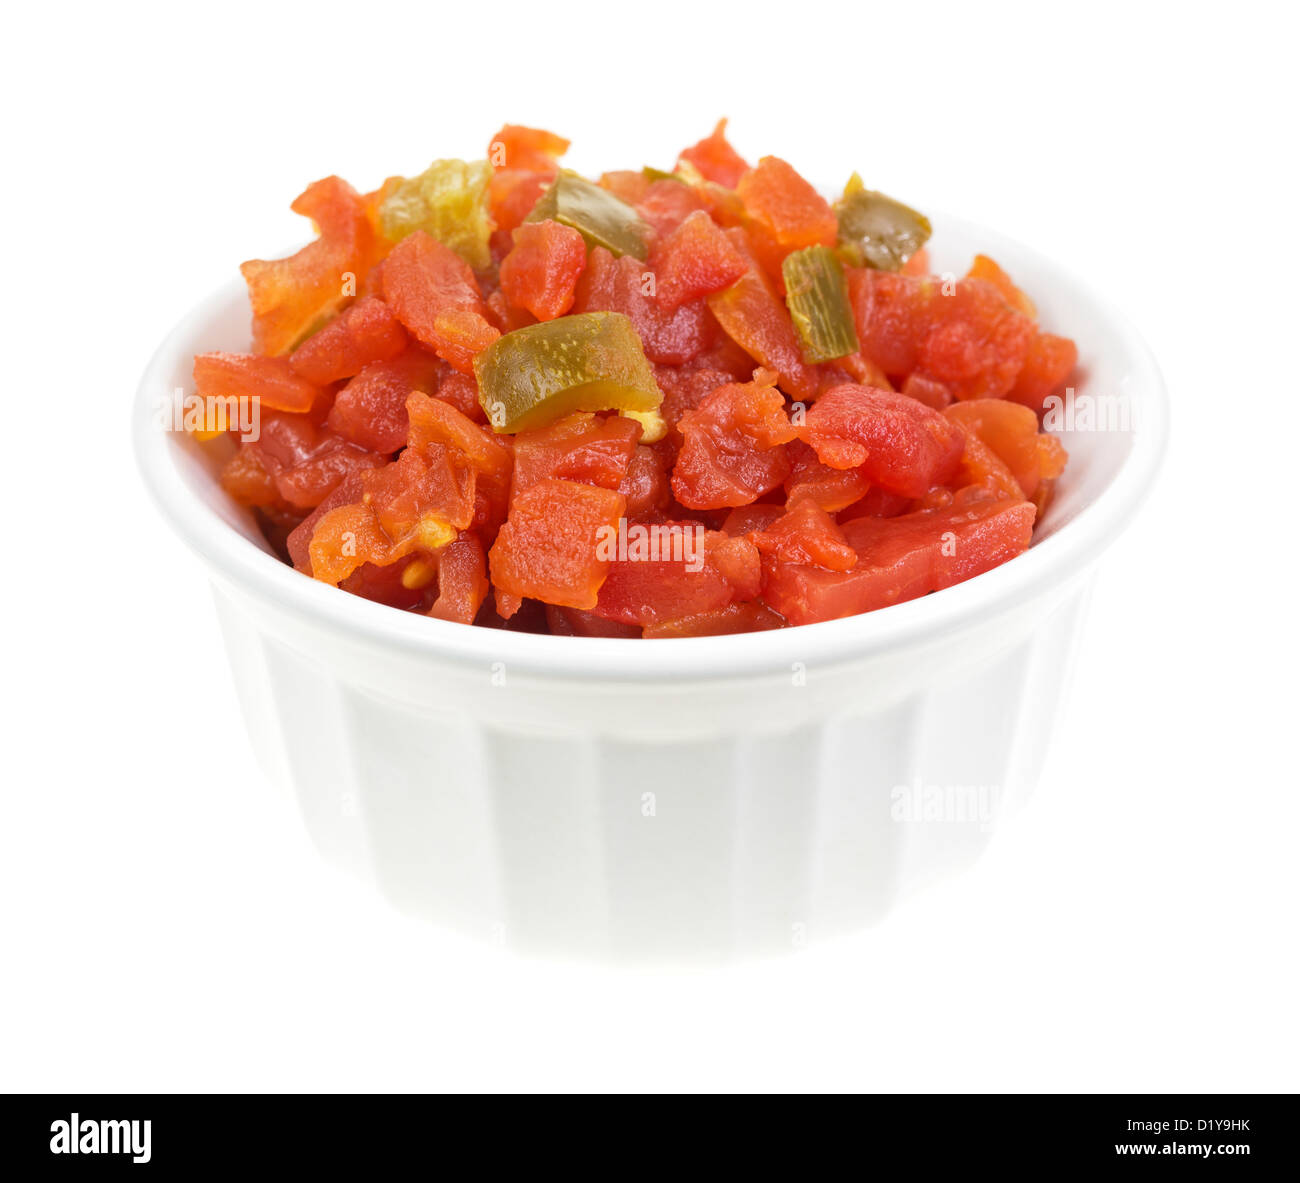 A small bowl filled with diced tomatoes and green peppers on a white background. Stock Photo